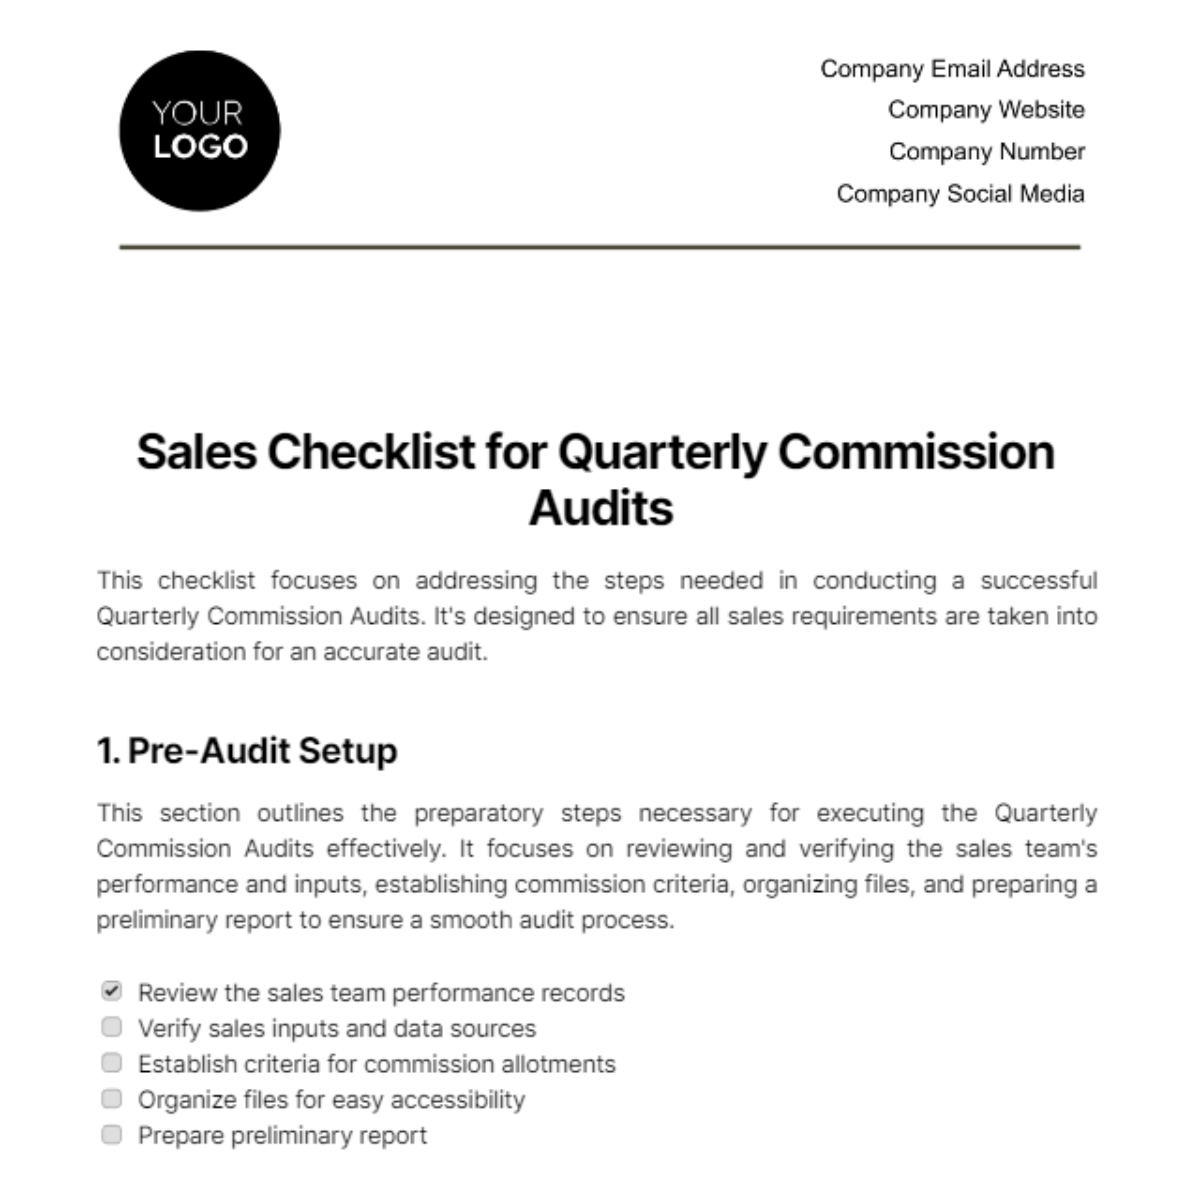 Free Sales Checklist for Quarterly Commission Audits Template